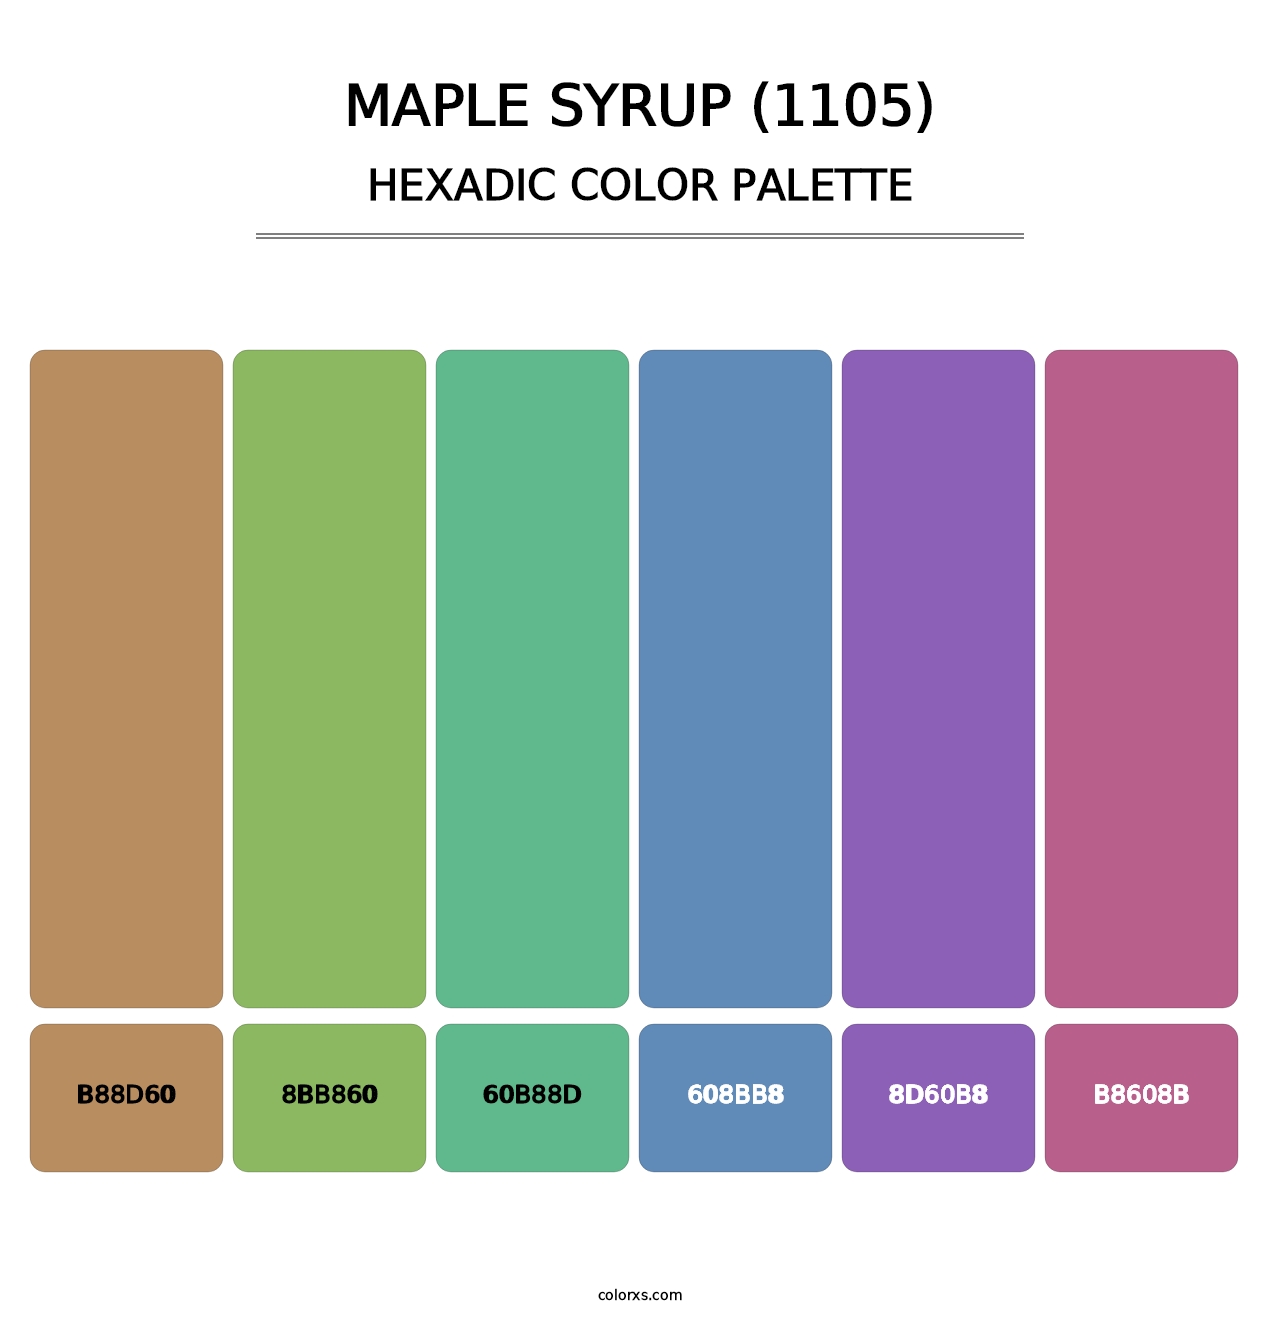 Maple Syrup (1105) - Hexadic Color Palette